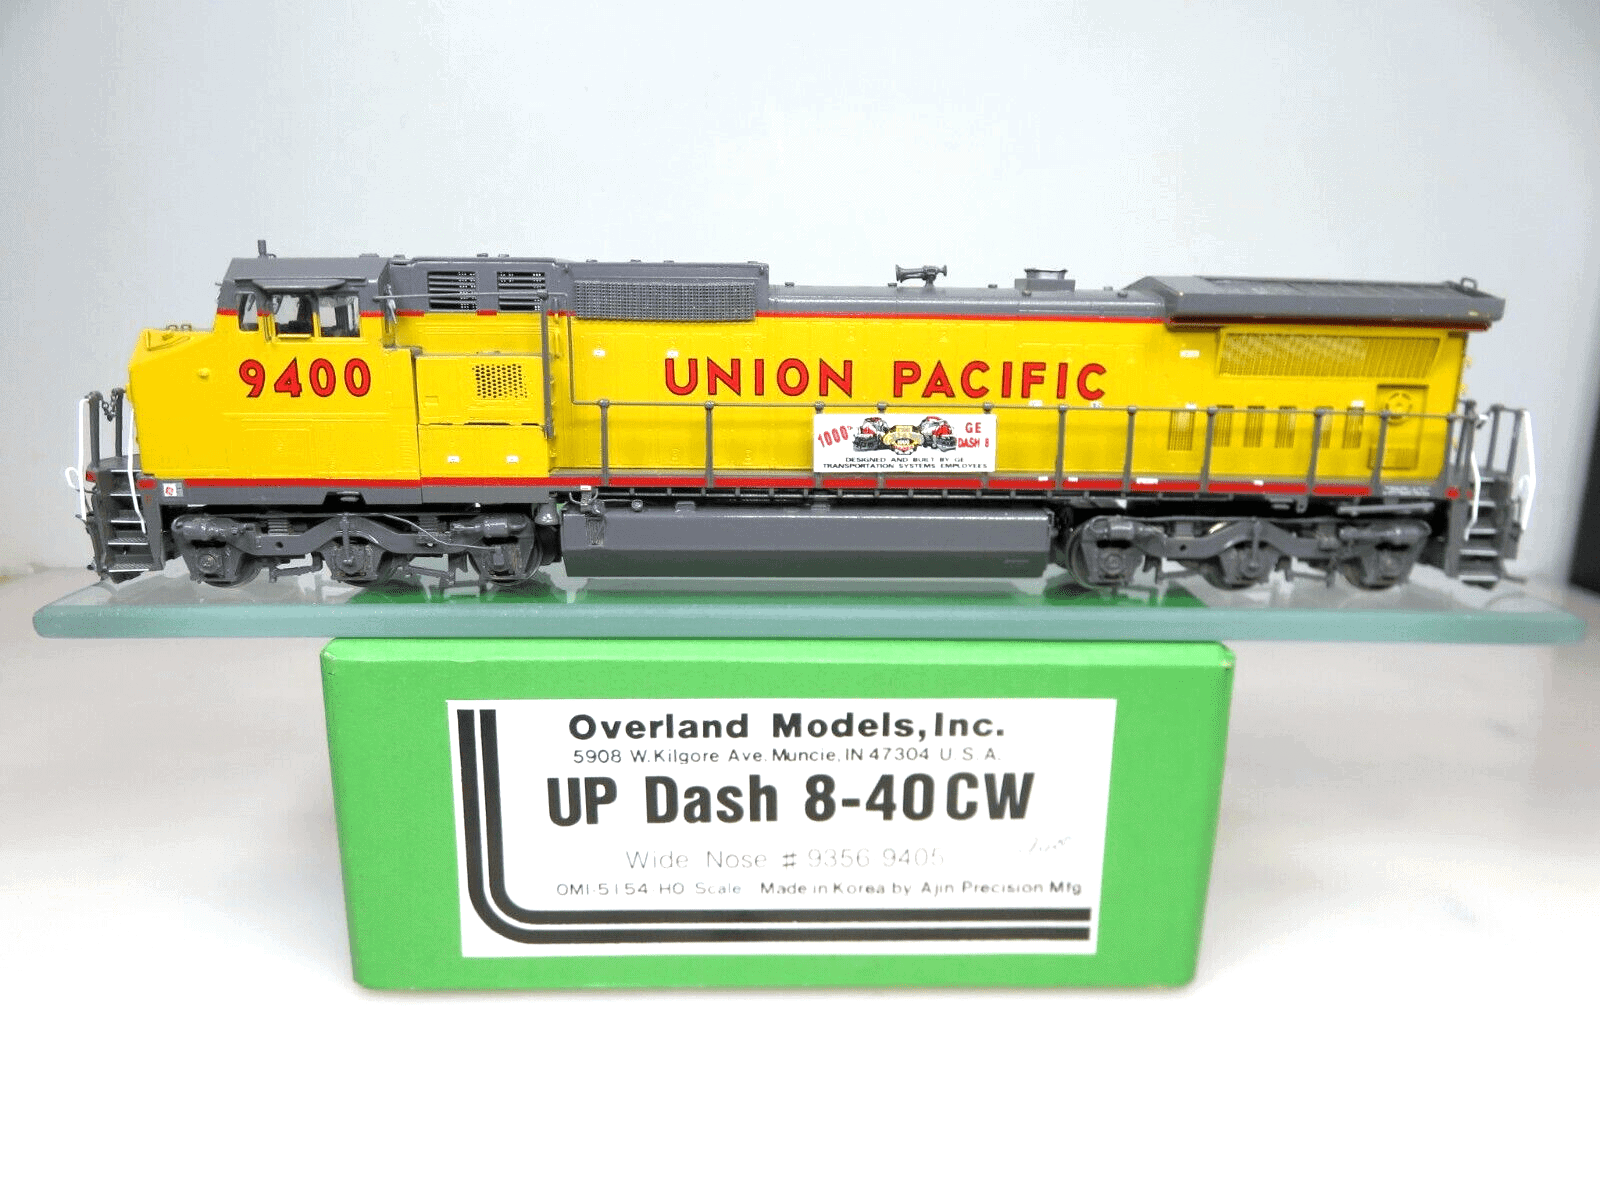 Overland Models Brass OMI-5154 HO GE Dash 8-40CW Union Pacific Diesel  Locomotive - Brass Trains for Sale